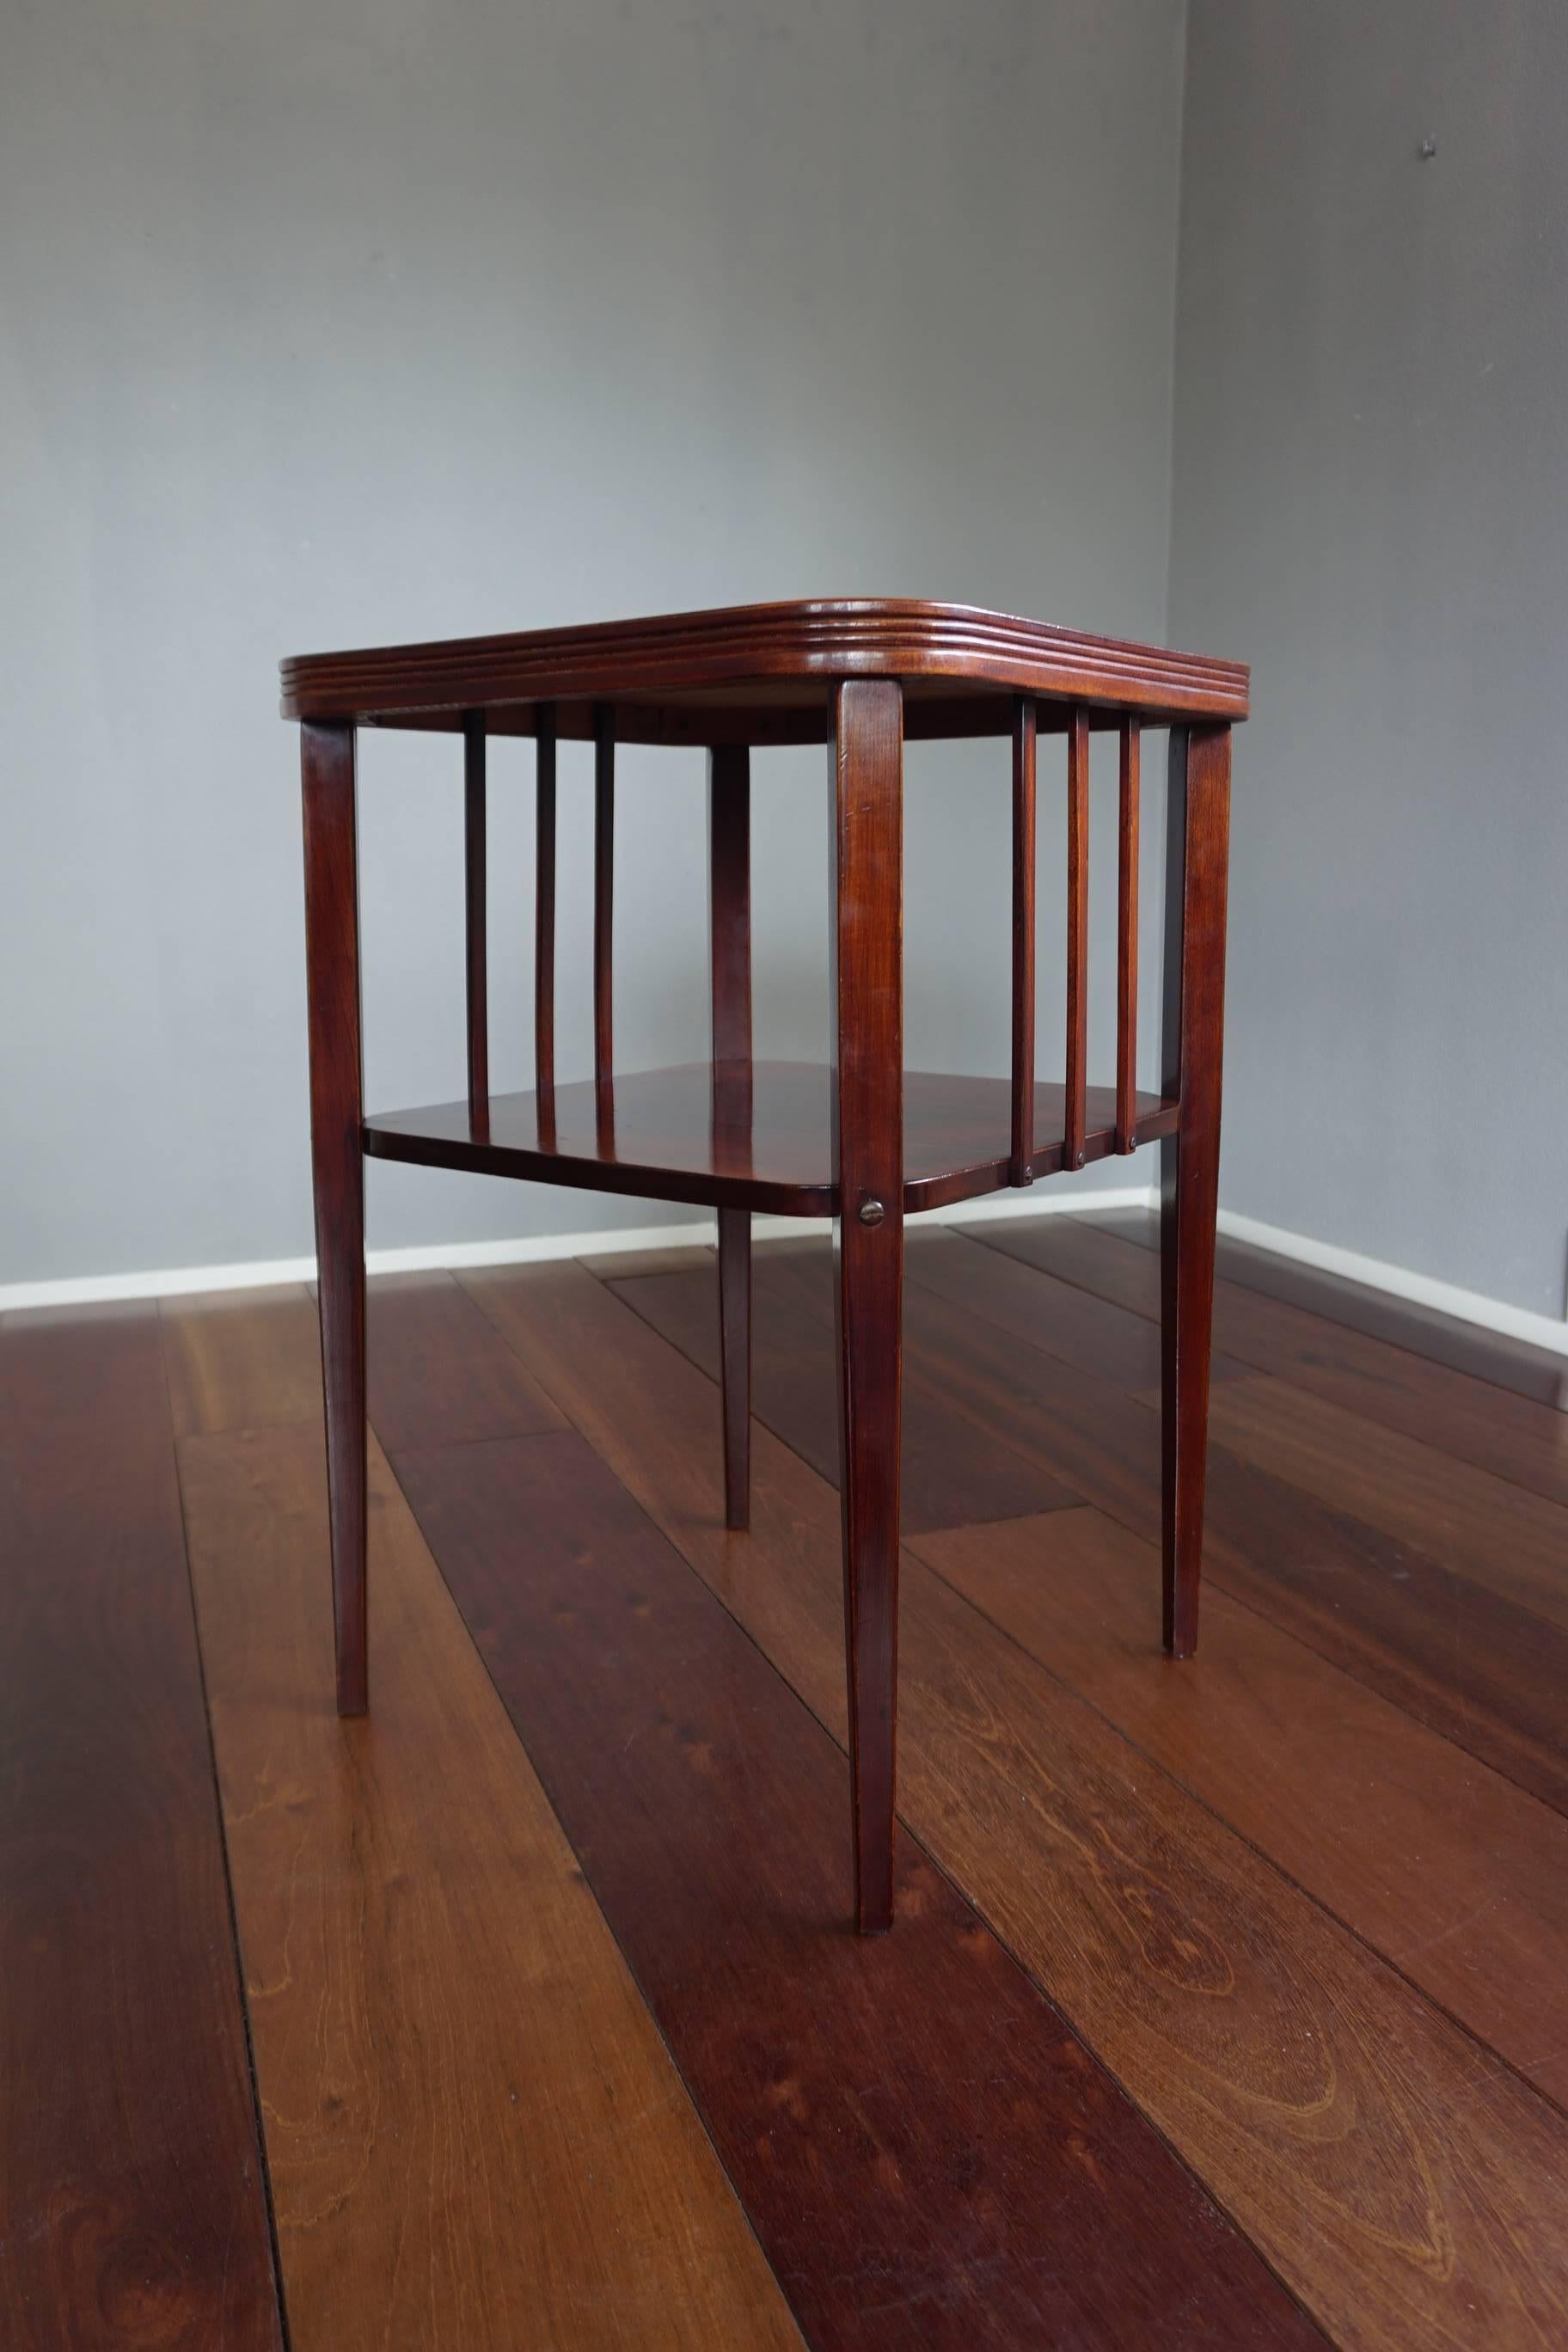 Thonet marked, highly stylish and functional table.

If ever there was a timeless design then this Viennese Secession table would be it. The perfect proportion, the open design, the perfect size and the beautiful color and materials make it an